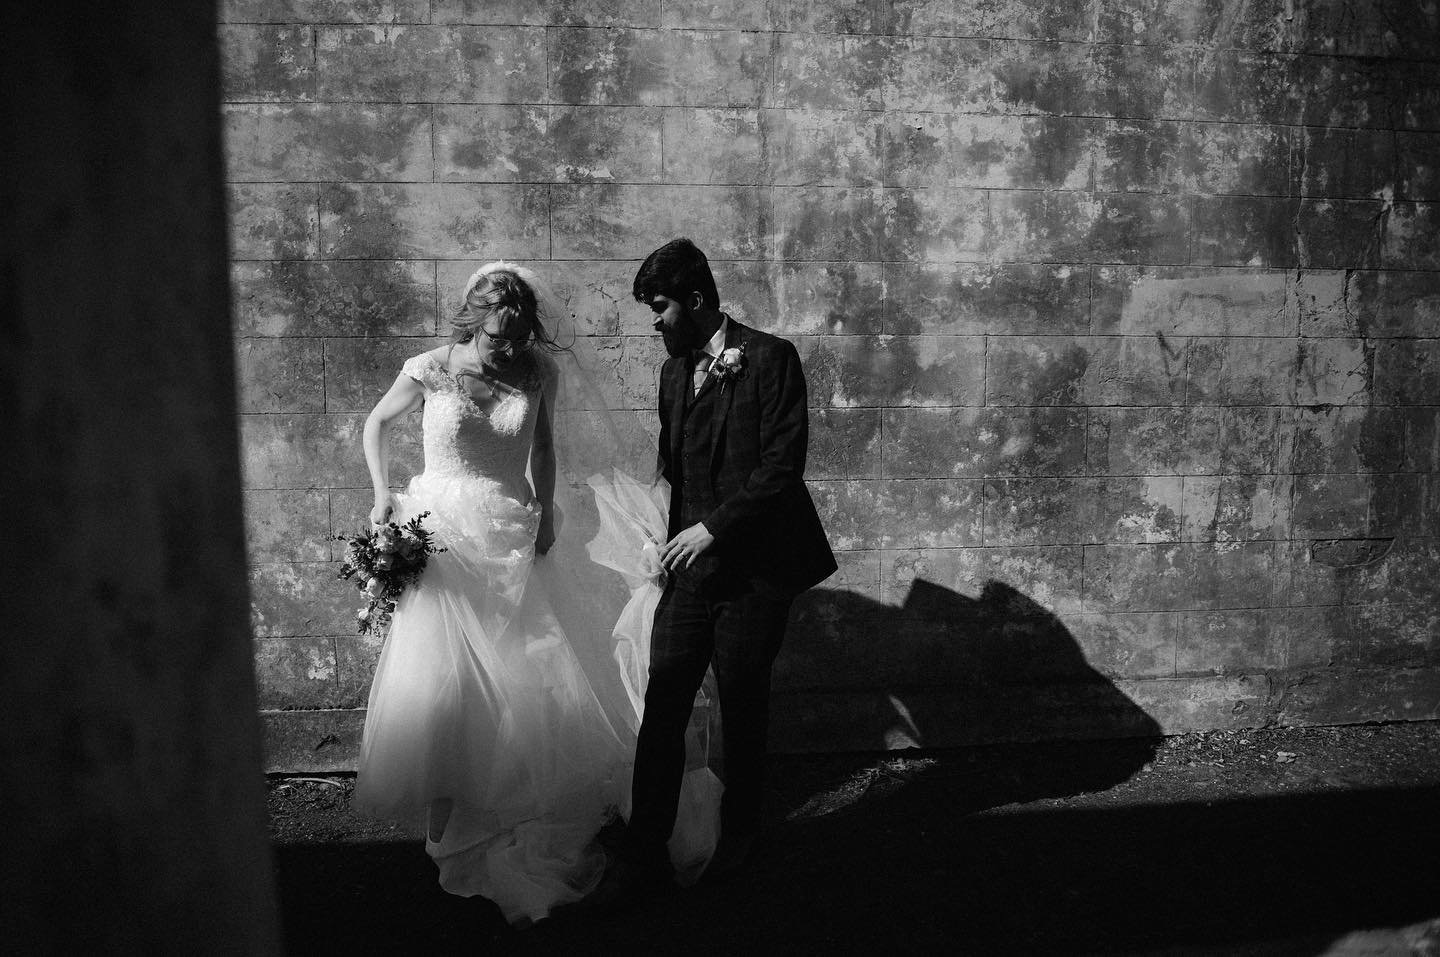 Loves me a little black and white at the end of a wedding edit. Got my editing list down to zero so now I get to rustle up some photos from our holiday!